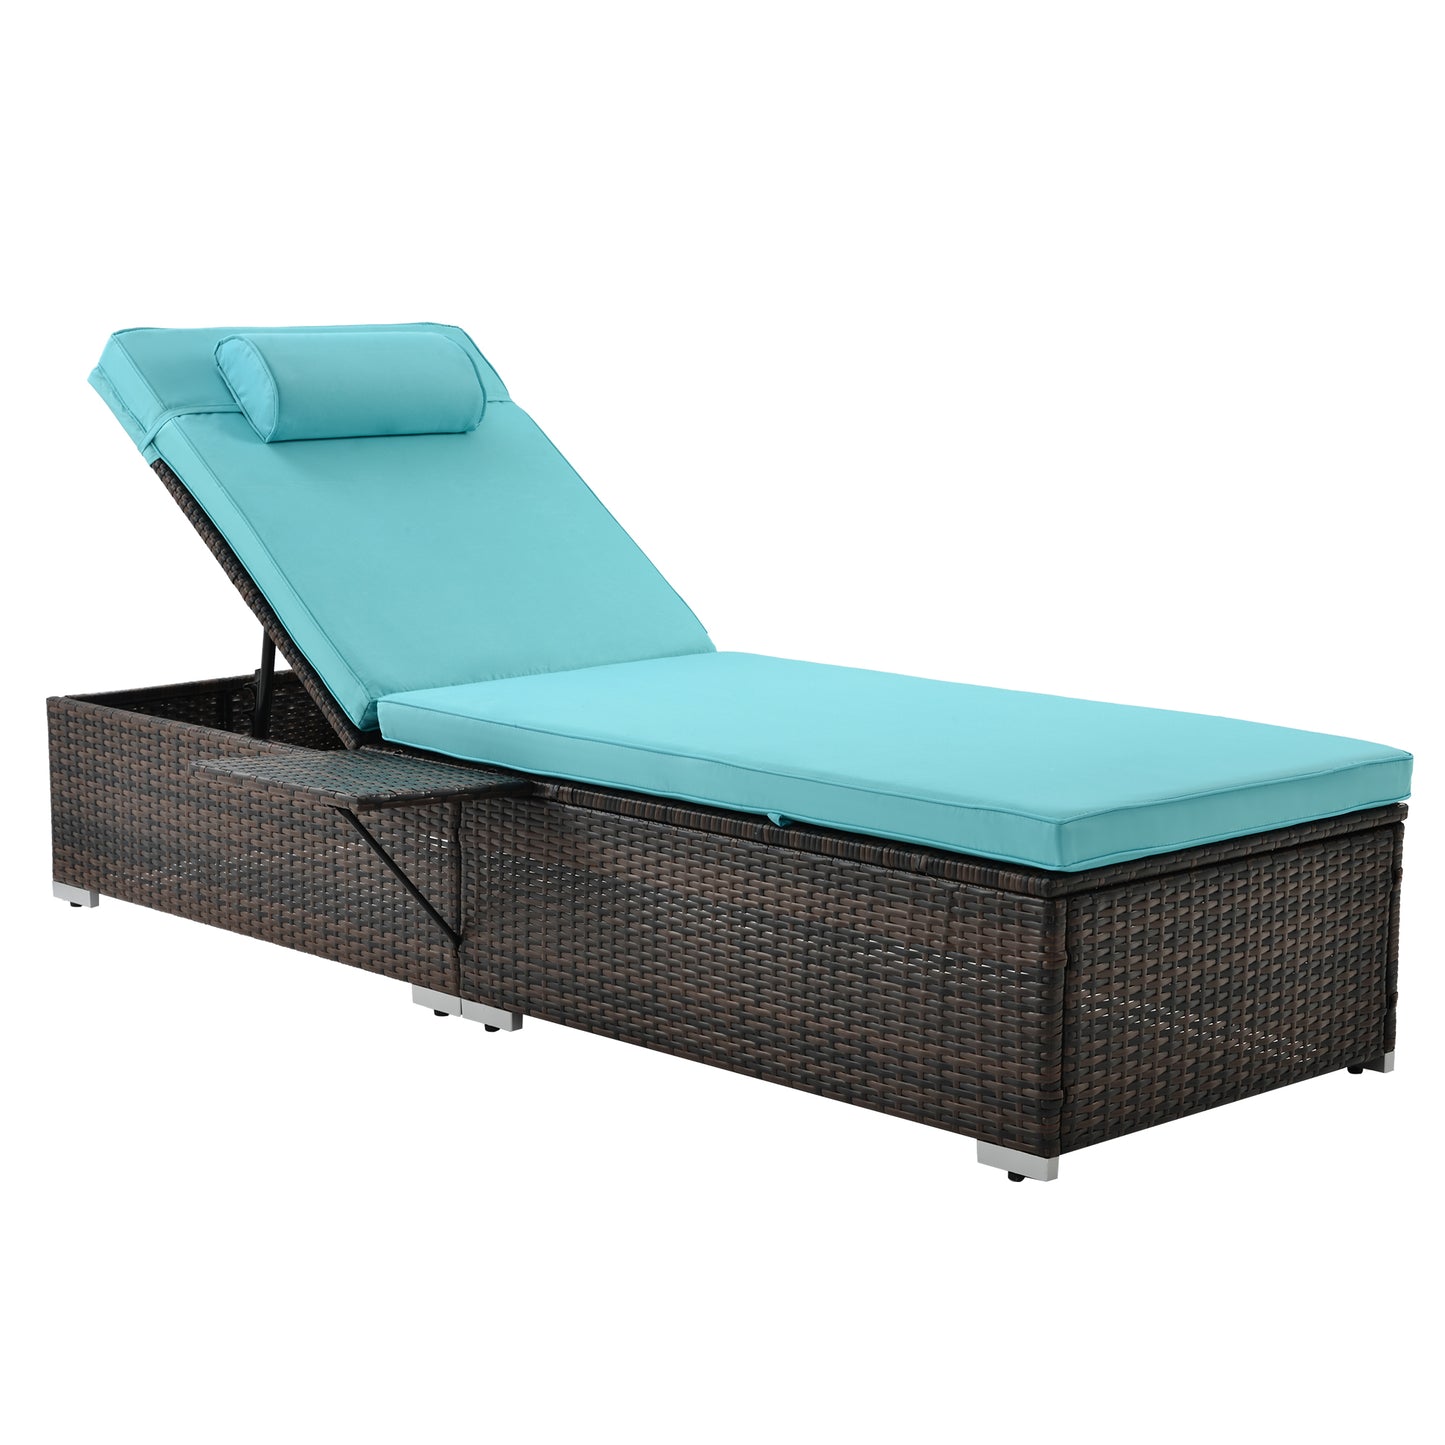 Outdoor PE Wicker Chaise Lounge - 2 Piece patio lounge chair